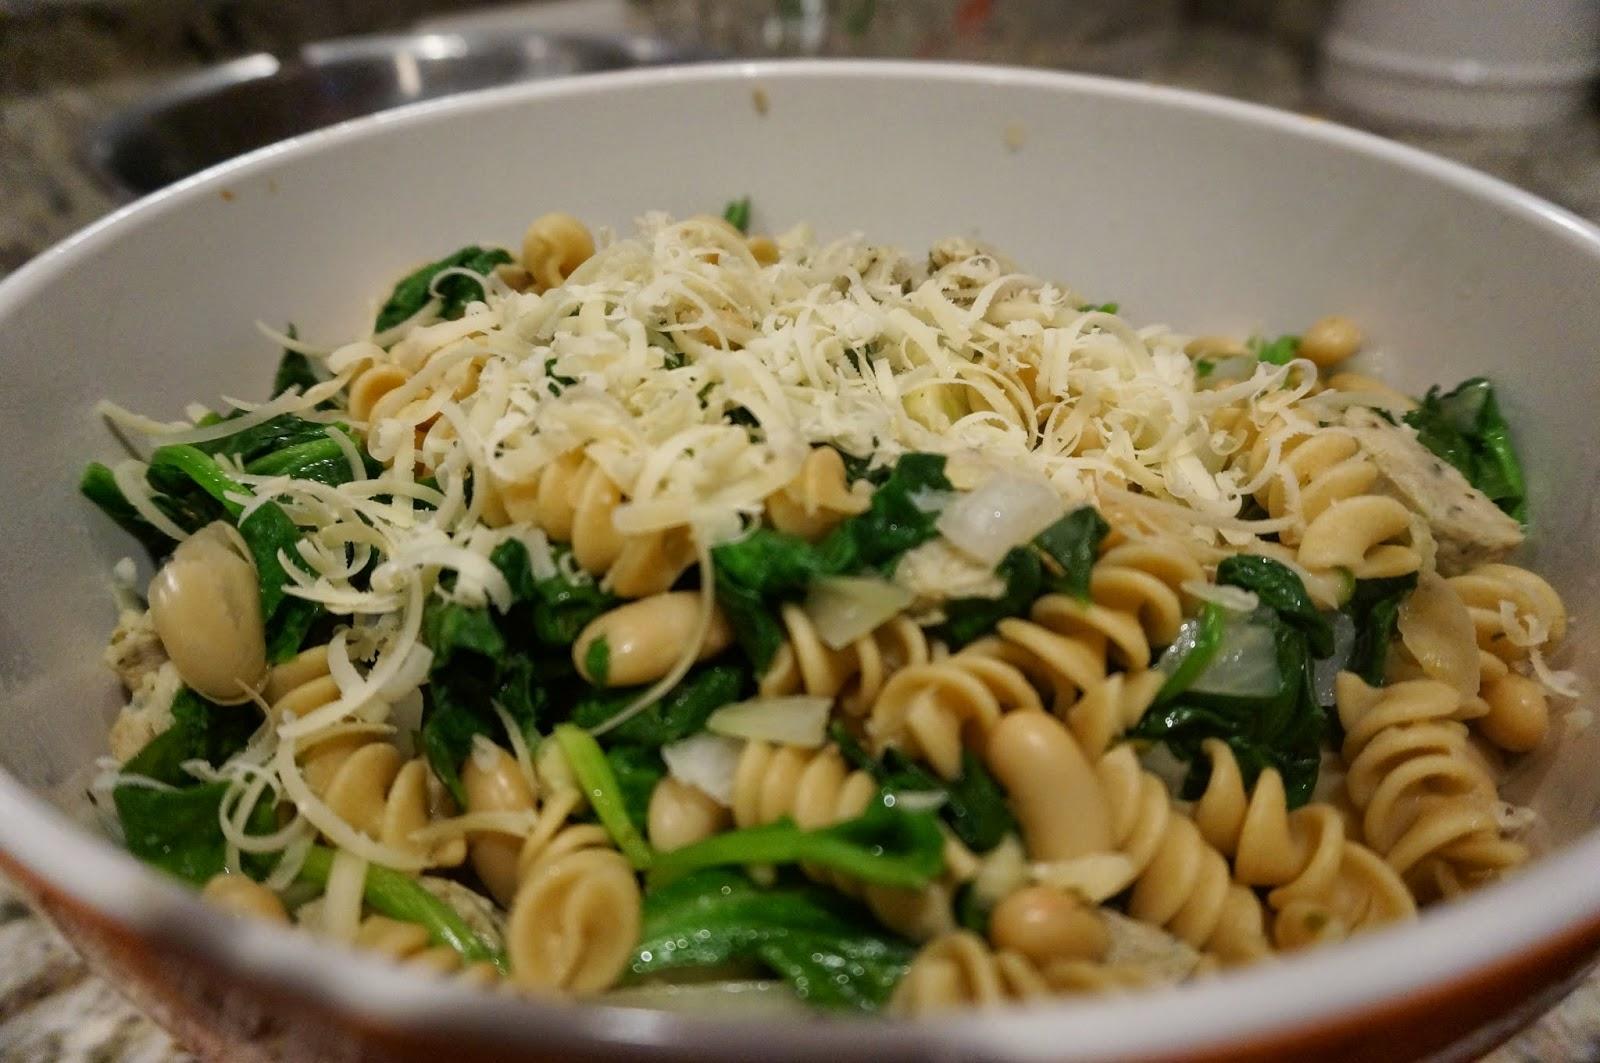 Whole grain rotini pasta cooked with swiss chard and topped with shredded parmesan cheese.